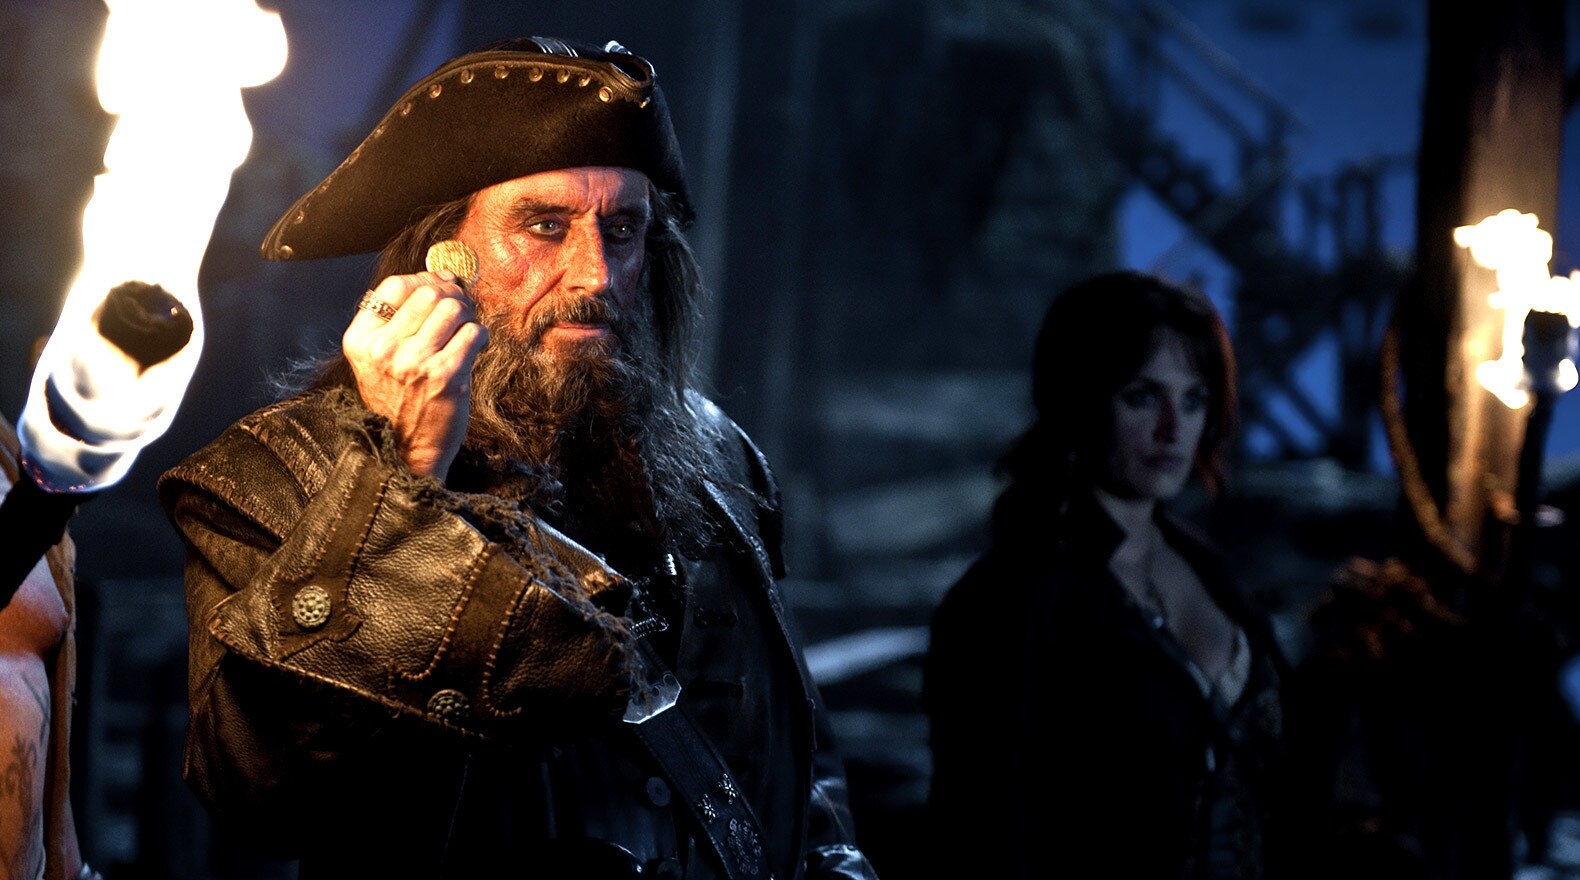 Blackbeard takes charge of his ship, the Queen Anne's Revenge.